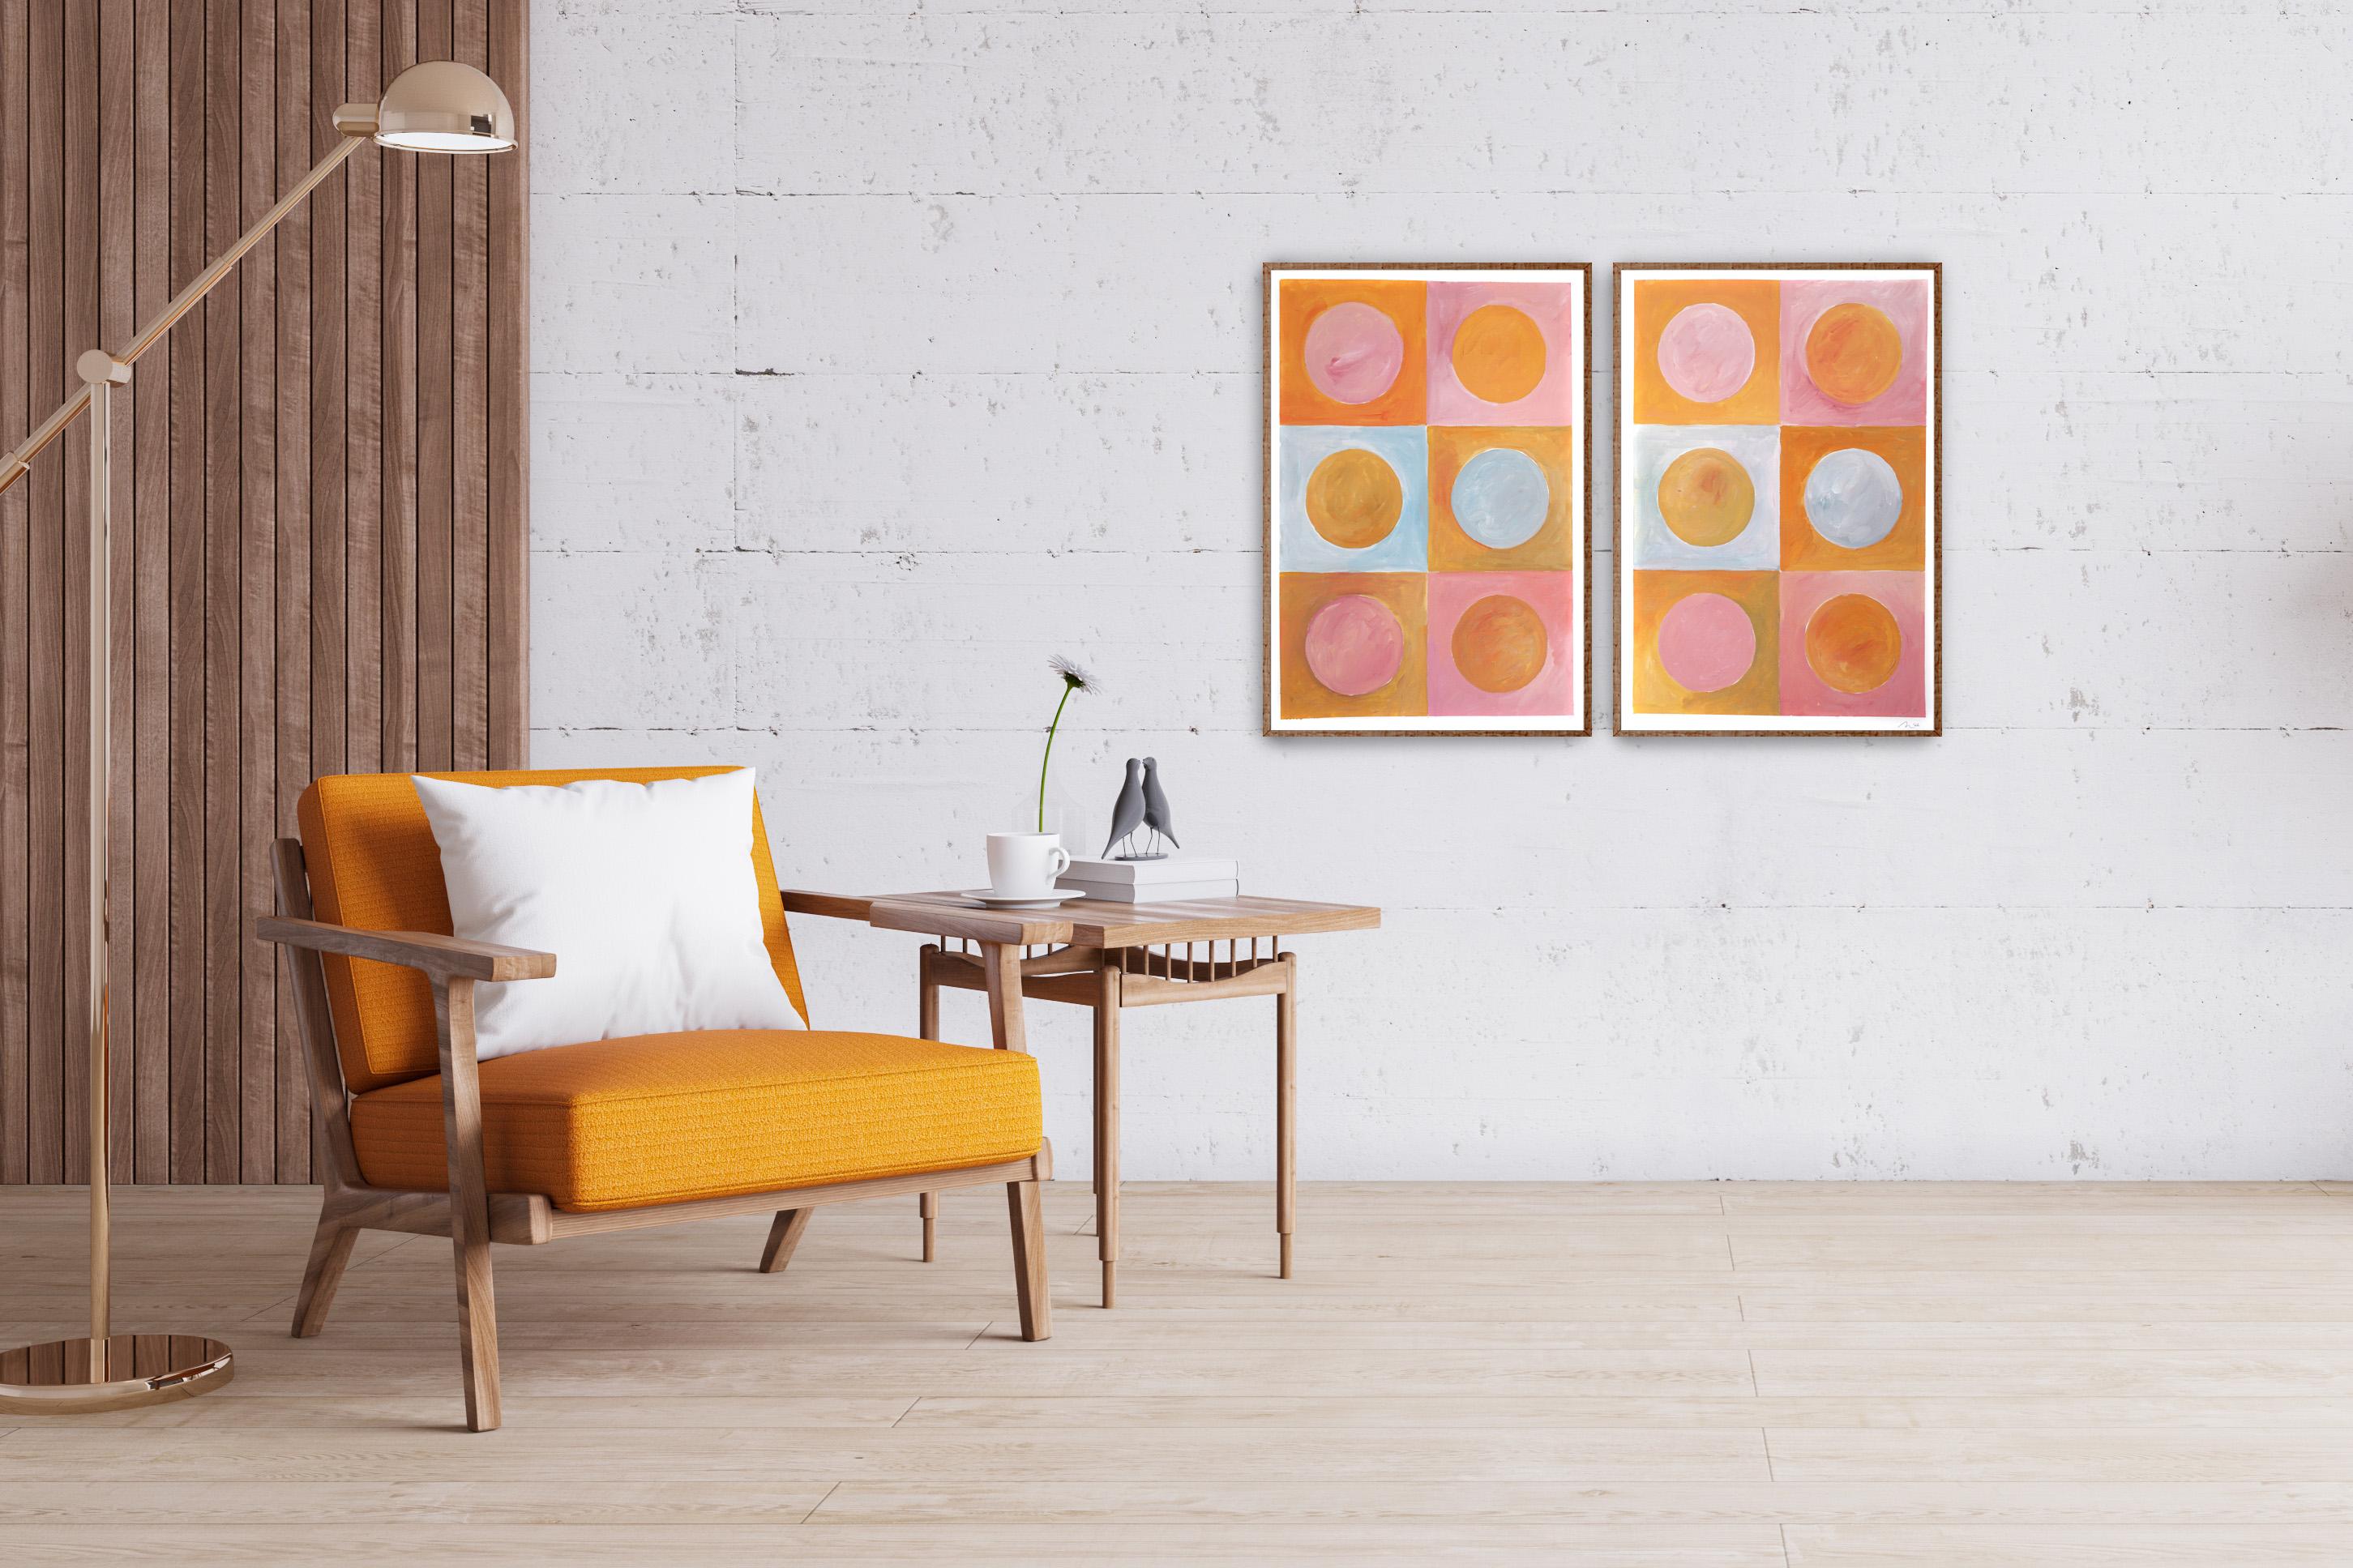 Sunset Sunny Lights, Warm Tones, Miami Vintage Pink and Orange Tiles Diptych - Painting by Natalia Roman